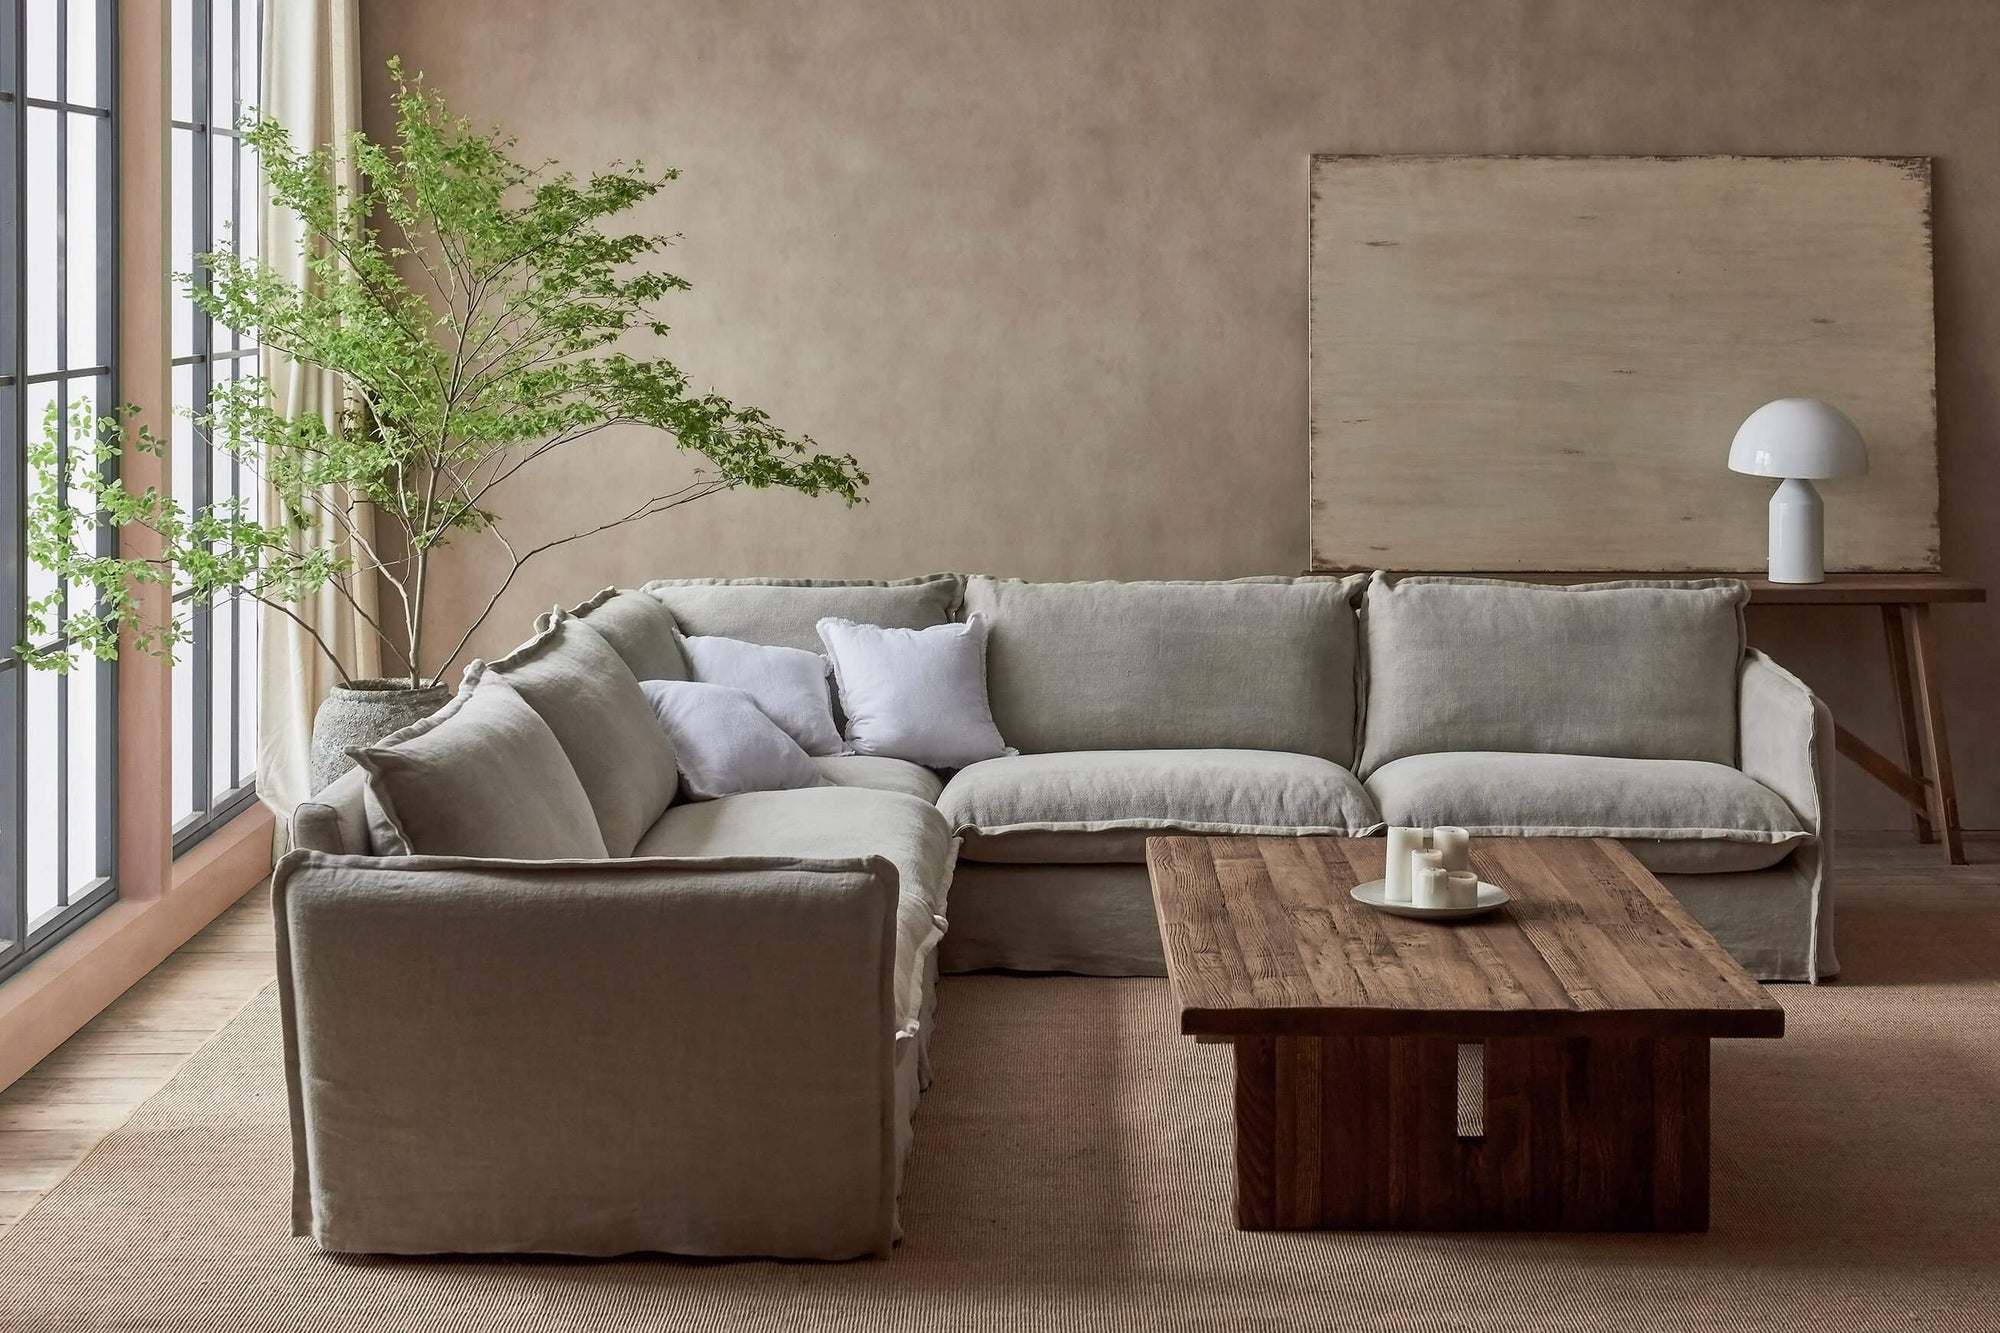 Neva Corner Sectional Sofa in Jasmine Rice, a light warm greige Medium Weight Linen, placed in a sunlit room alongside the Kai Coffee Table